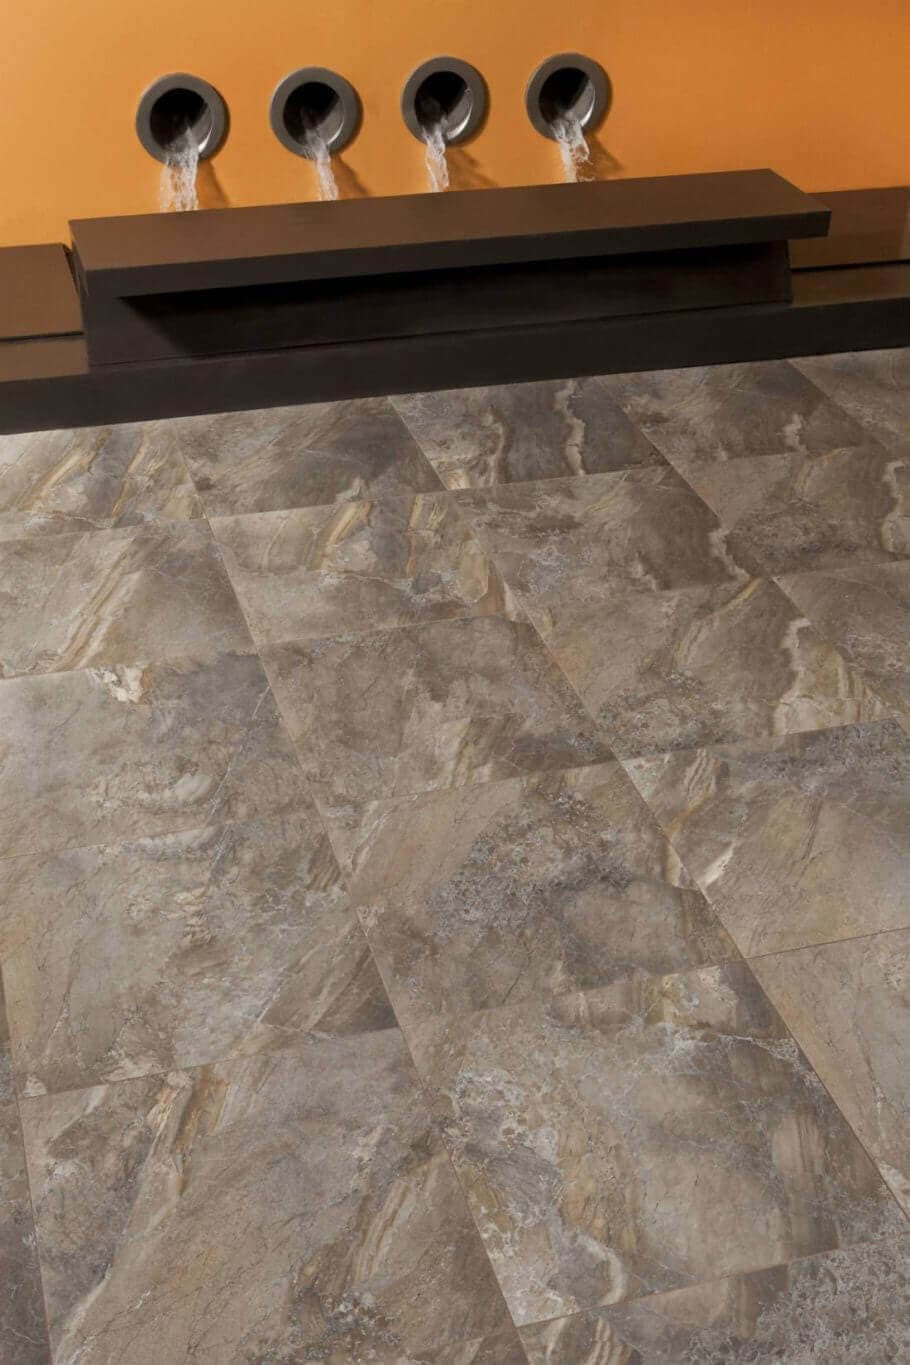 Brown rectified tile with precise, crisp edges